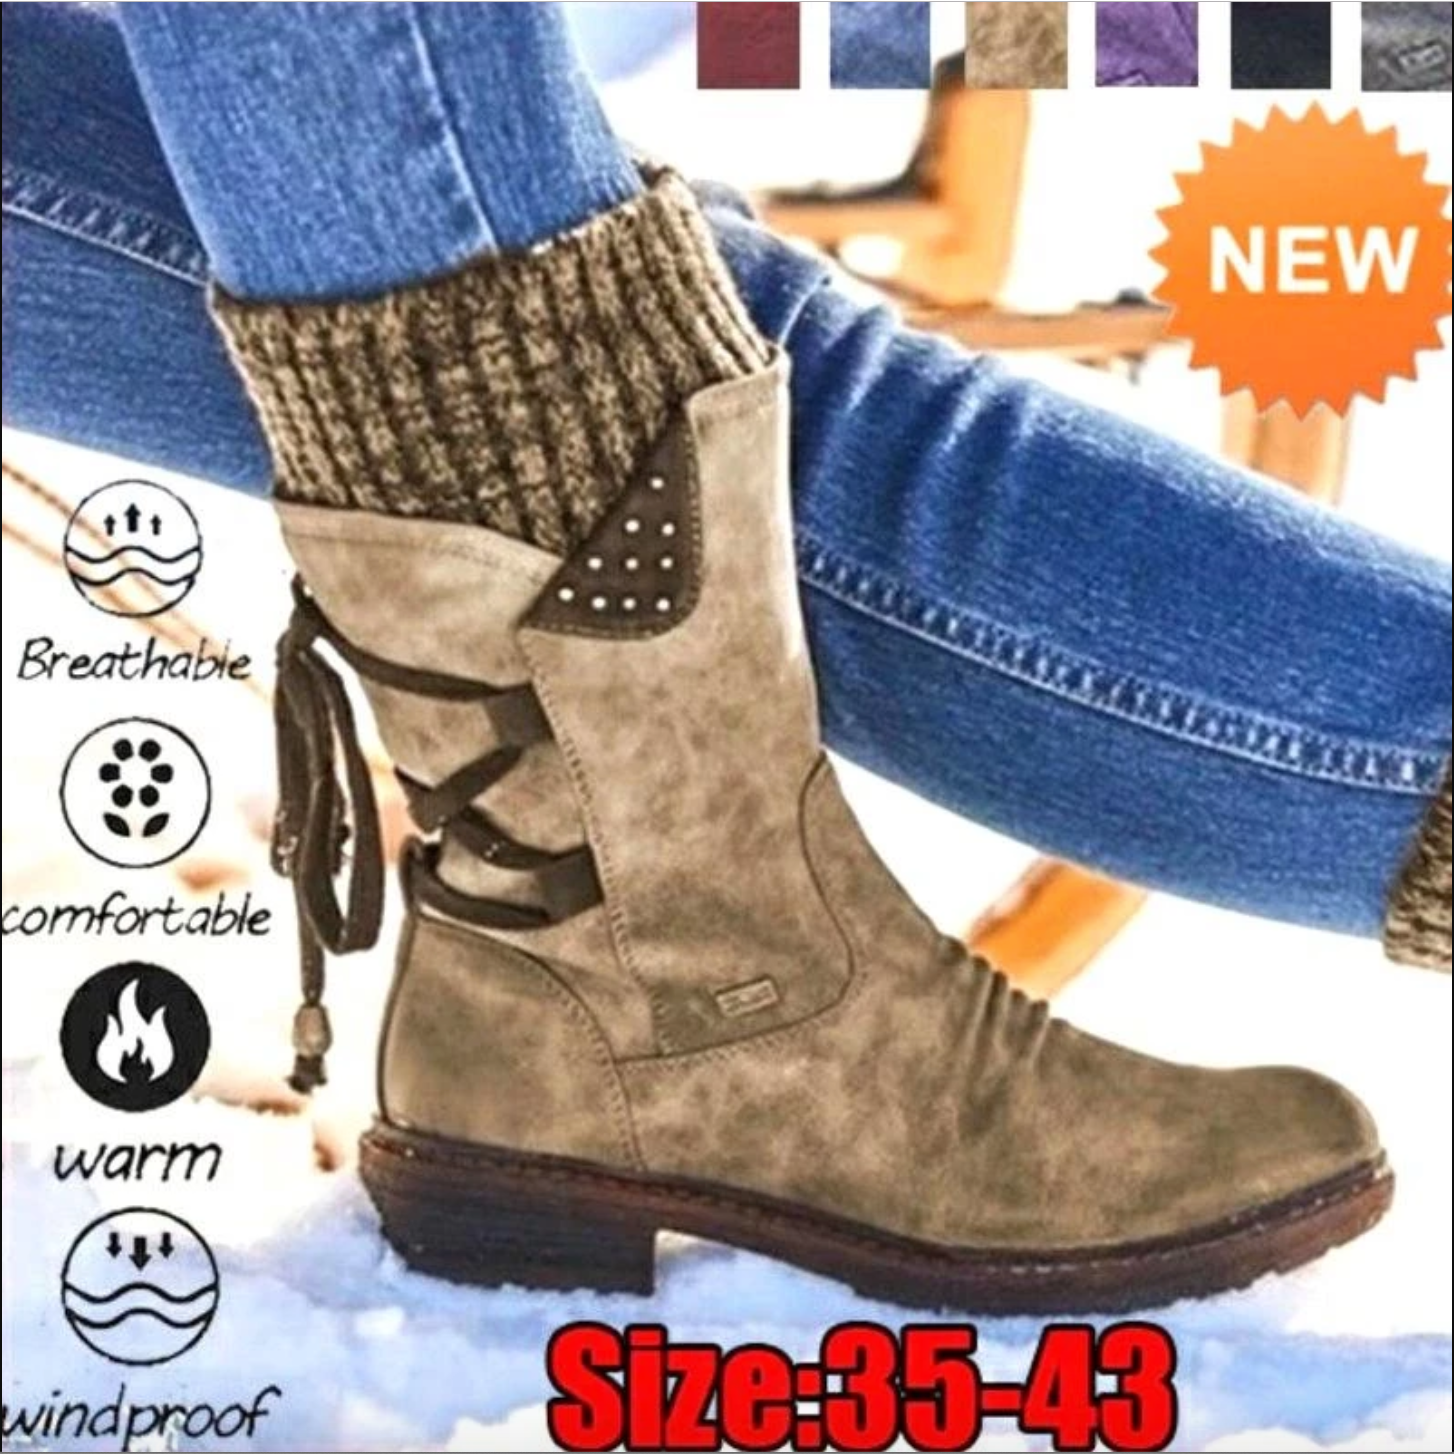 Women's Fall & Winter Arch Support Mid-calf Boots